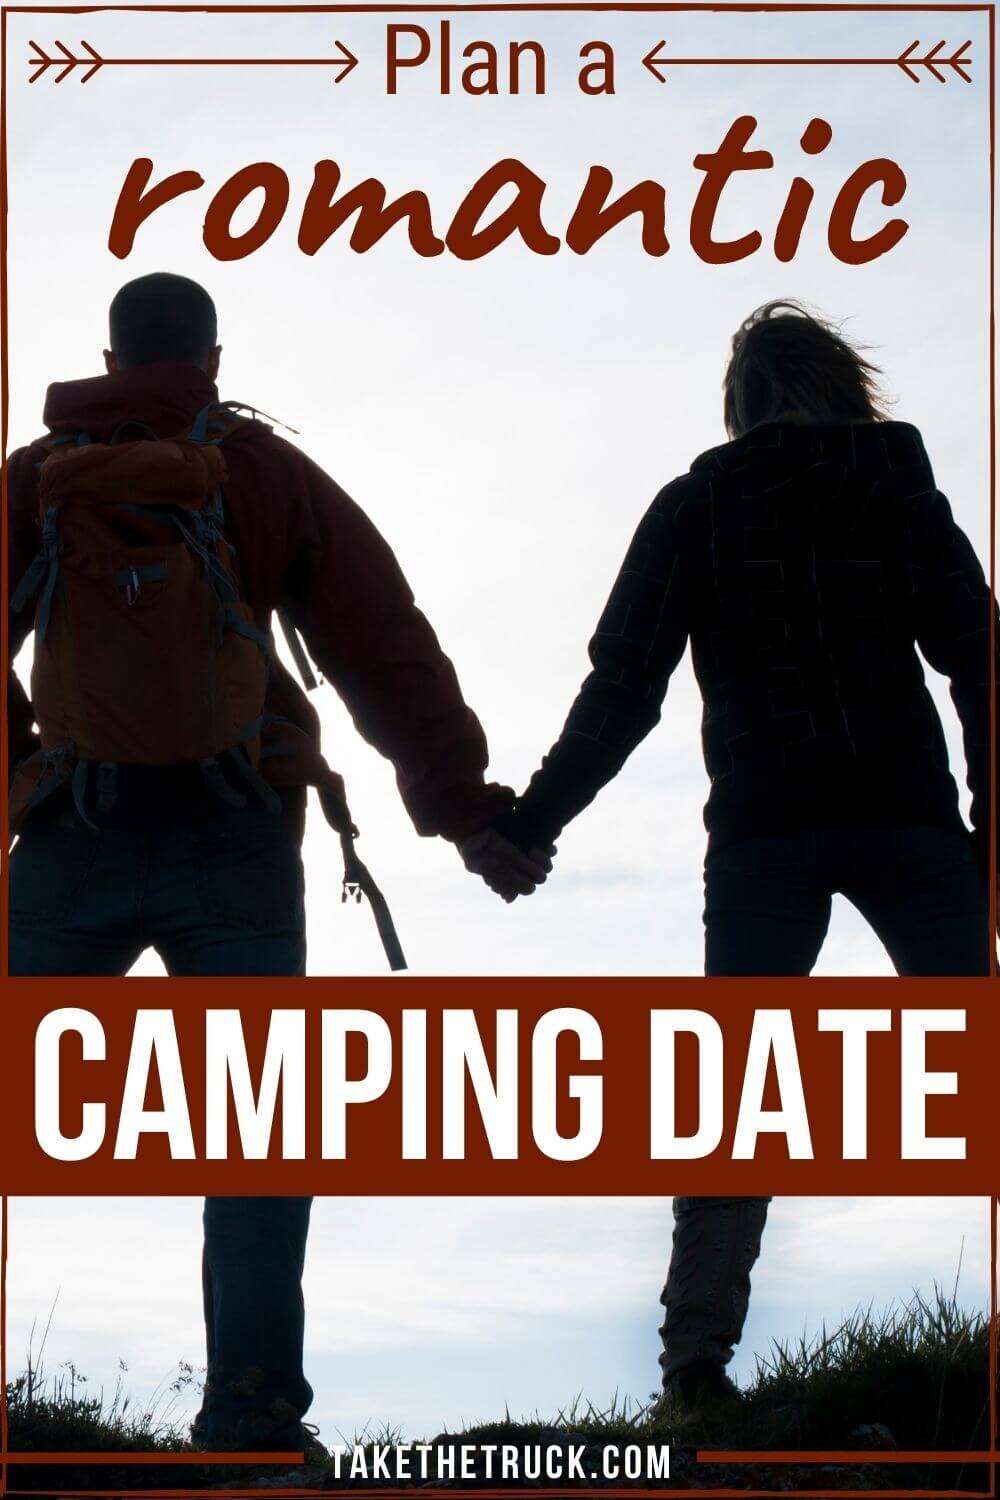 This post is all about romantic camping for couples! Tips on how to plan the perfect camping date night are given, from location to great mood-setting accessories. Up your romantic camping game!